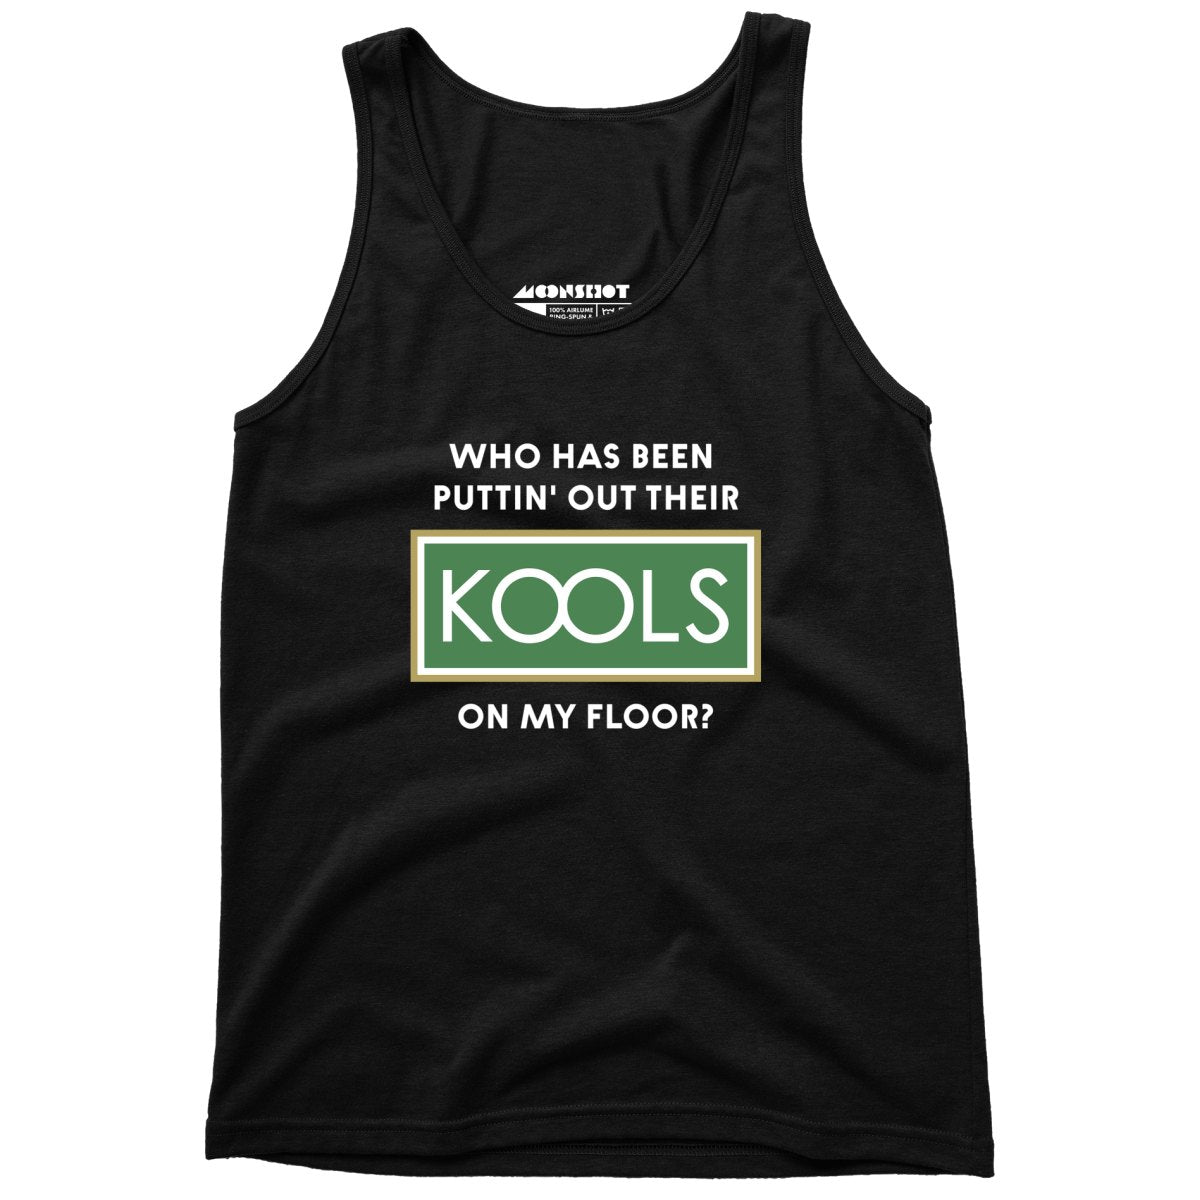 Who Has Been Puttin' Out Their Kools On My Floor? - Unisex Tank Top